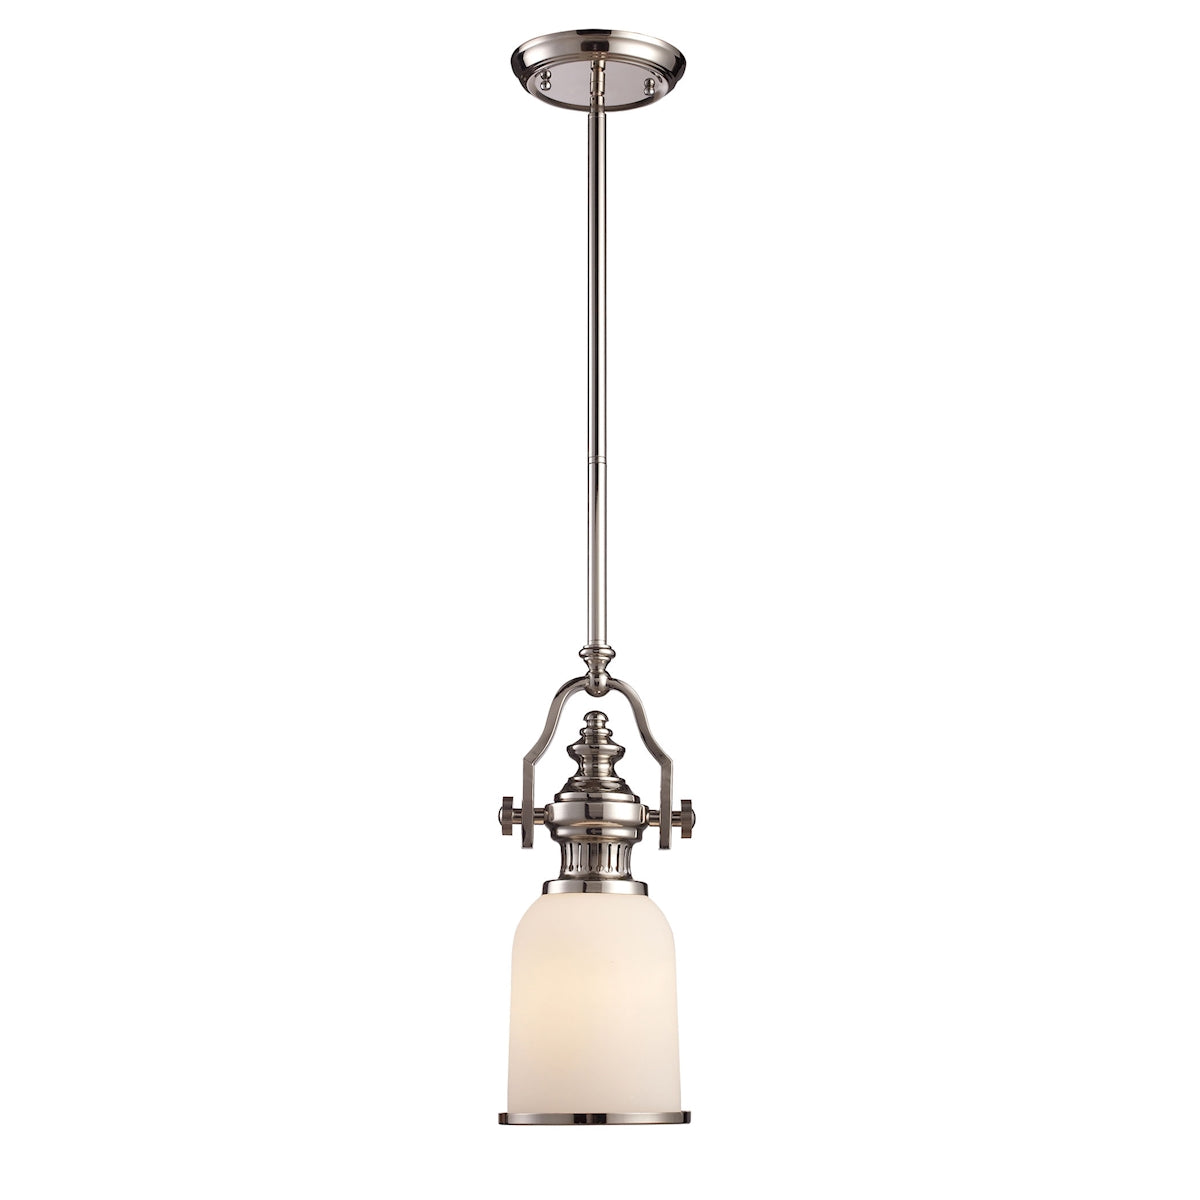 ELK Lighting 66112-1 Chadwick 1-Light Mini Pendant in Polished Nickel with White Glass